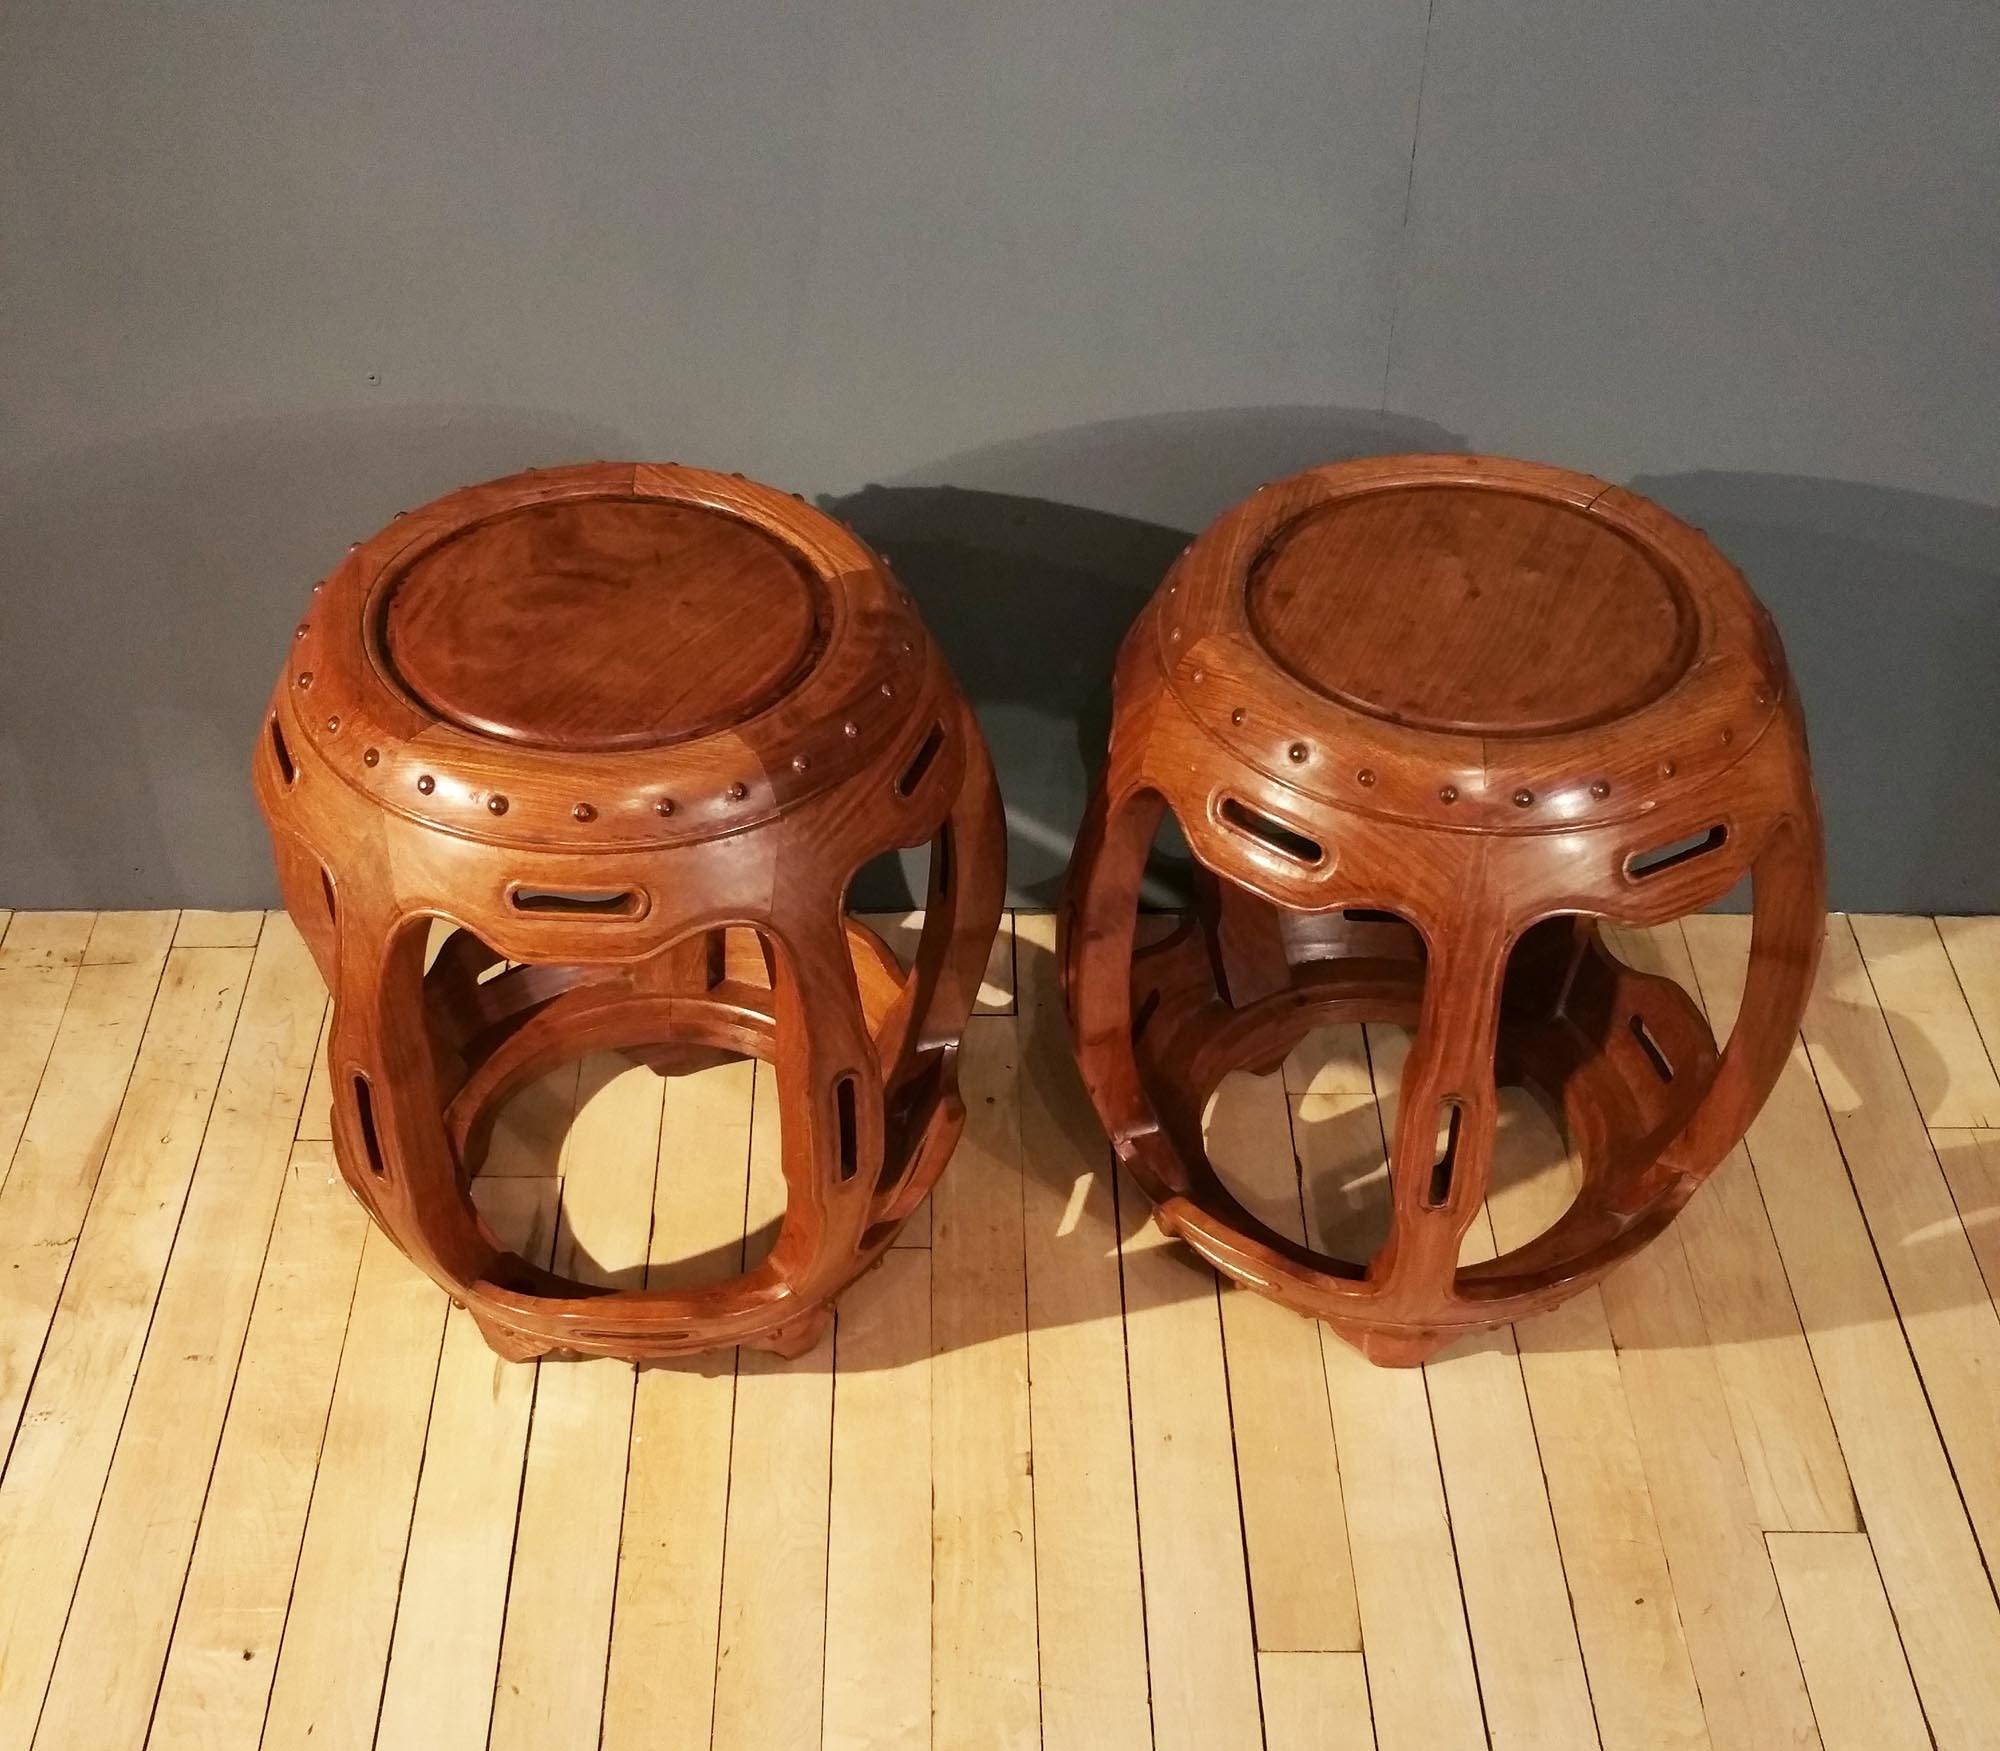 This very attractive pair of light colored Chinese hardwood barrel seats feature a decorative cut-out and shaped design. Each seat measures 16 in – 40.5 cm in diameter and 17 ¾ in – 45 cm in height.